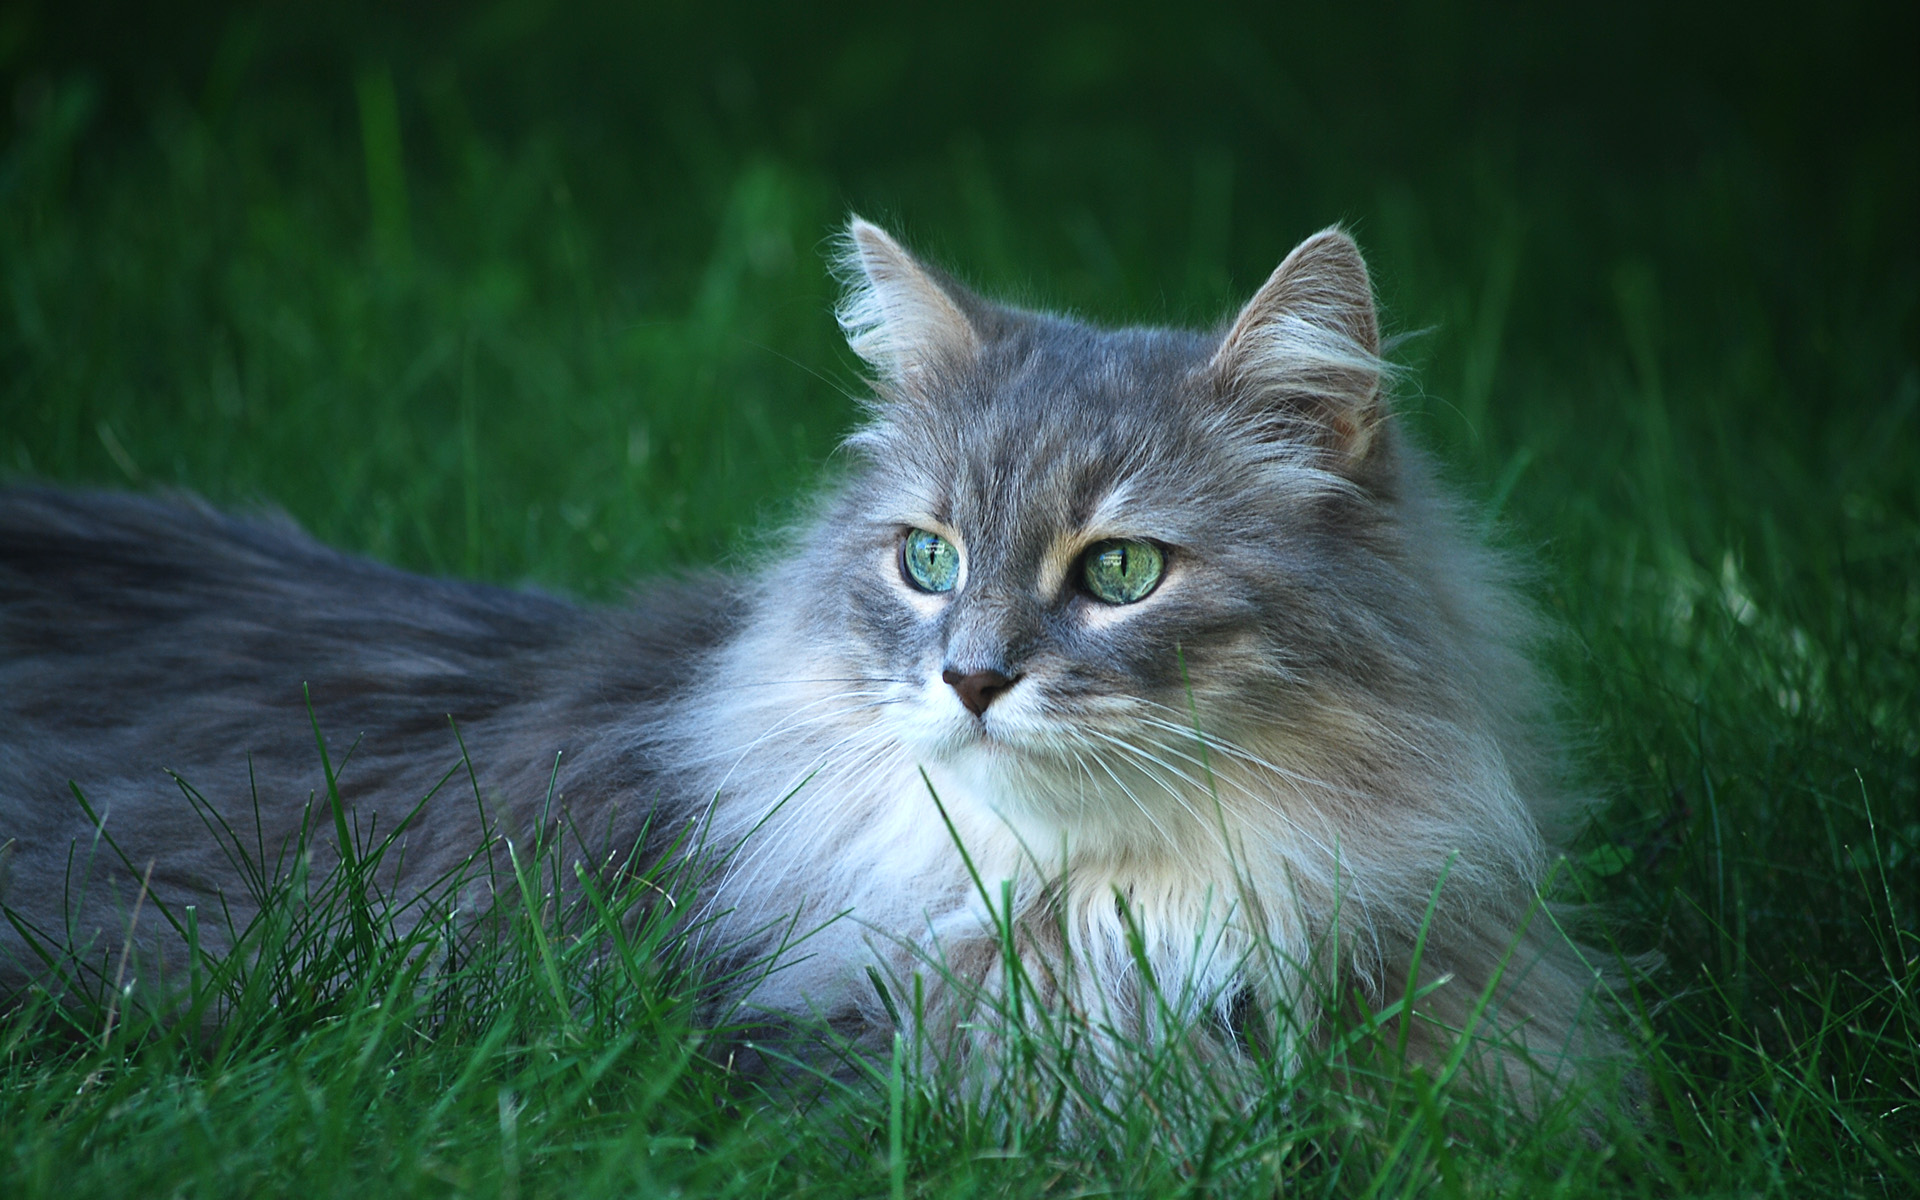 Fluffy cat with captivating green eyes - a beautiful animal captured in a desktop wallpaper.